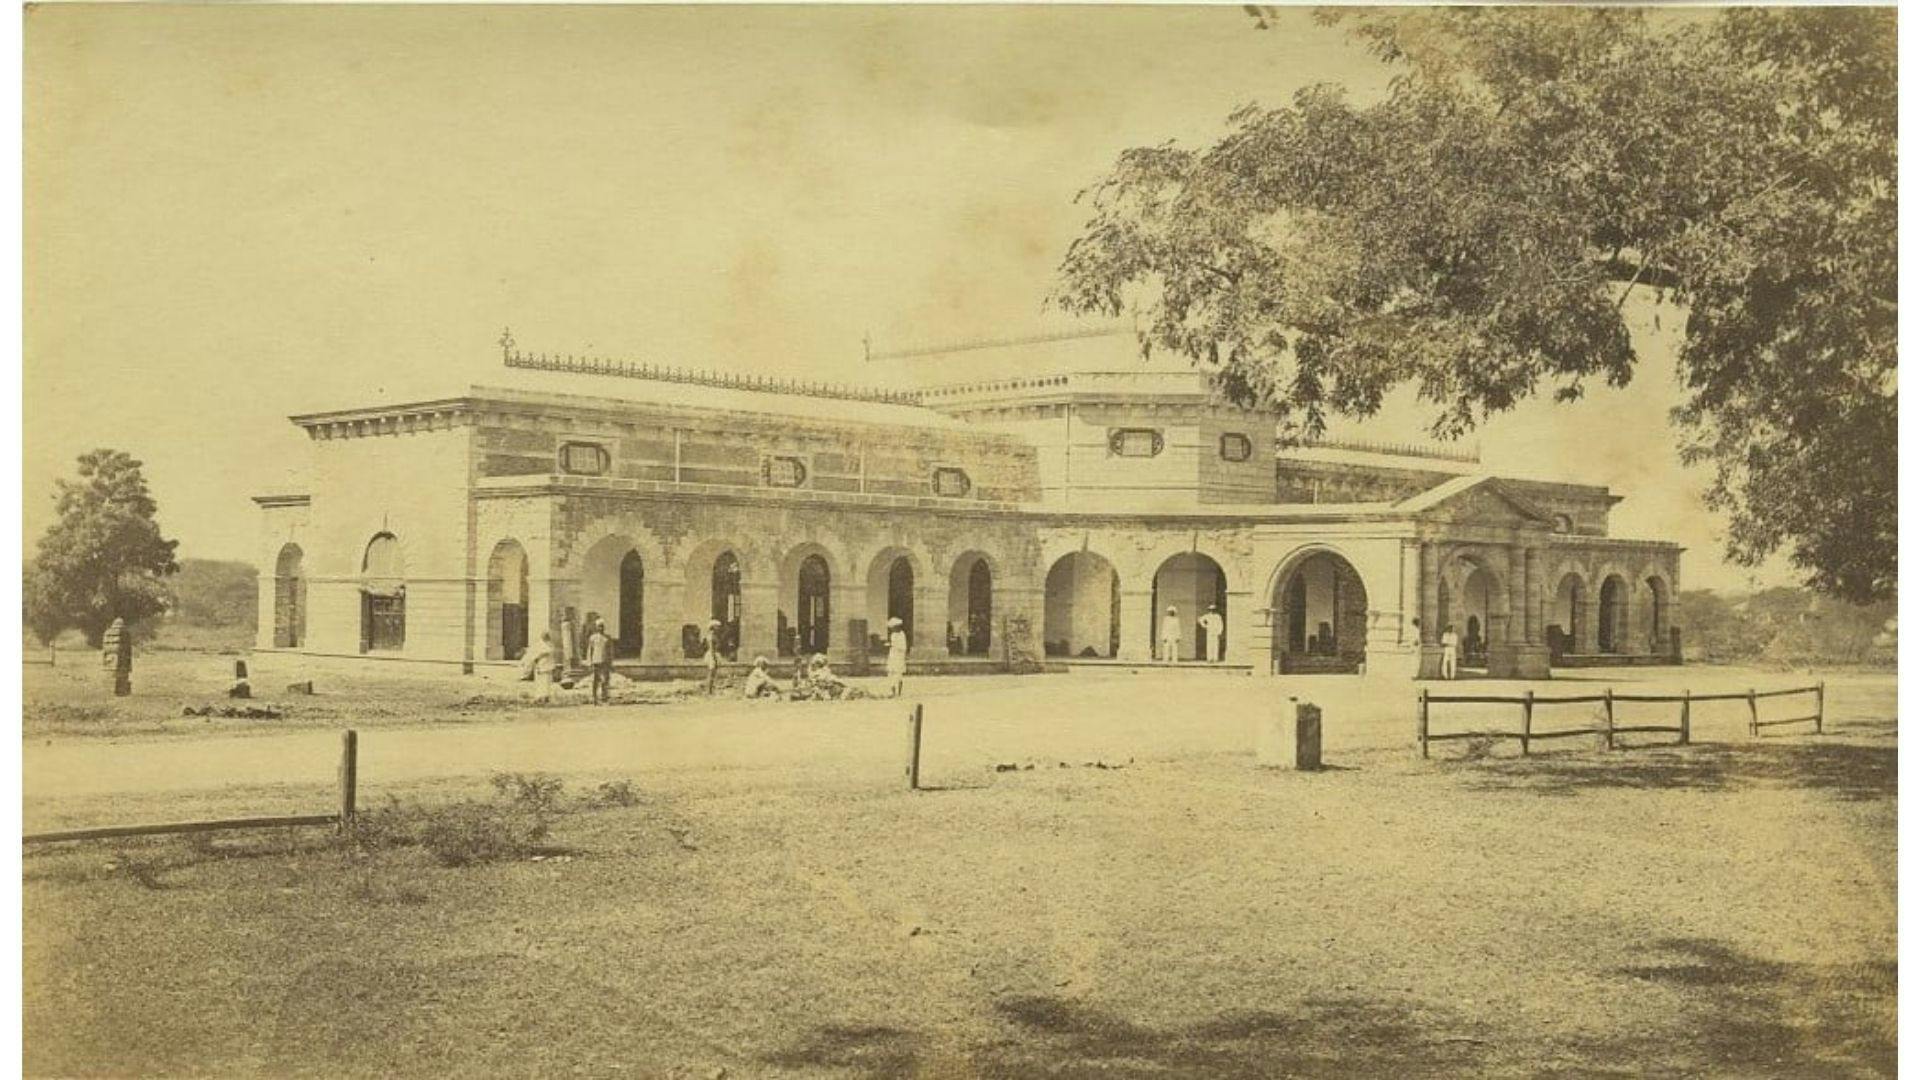 Central Museum of Nagpur, Photo taken in 1870